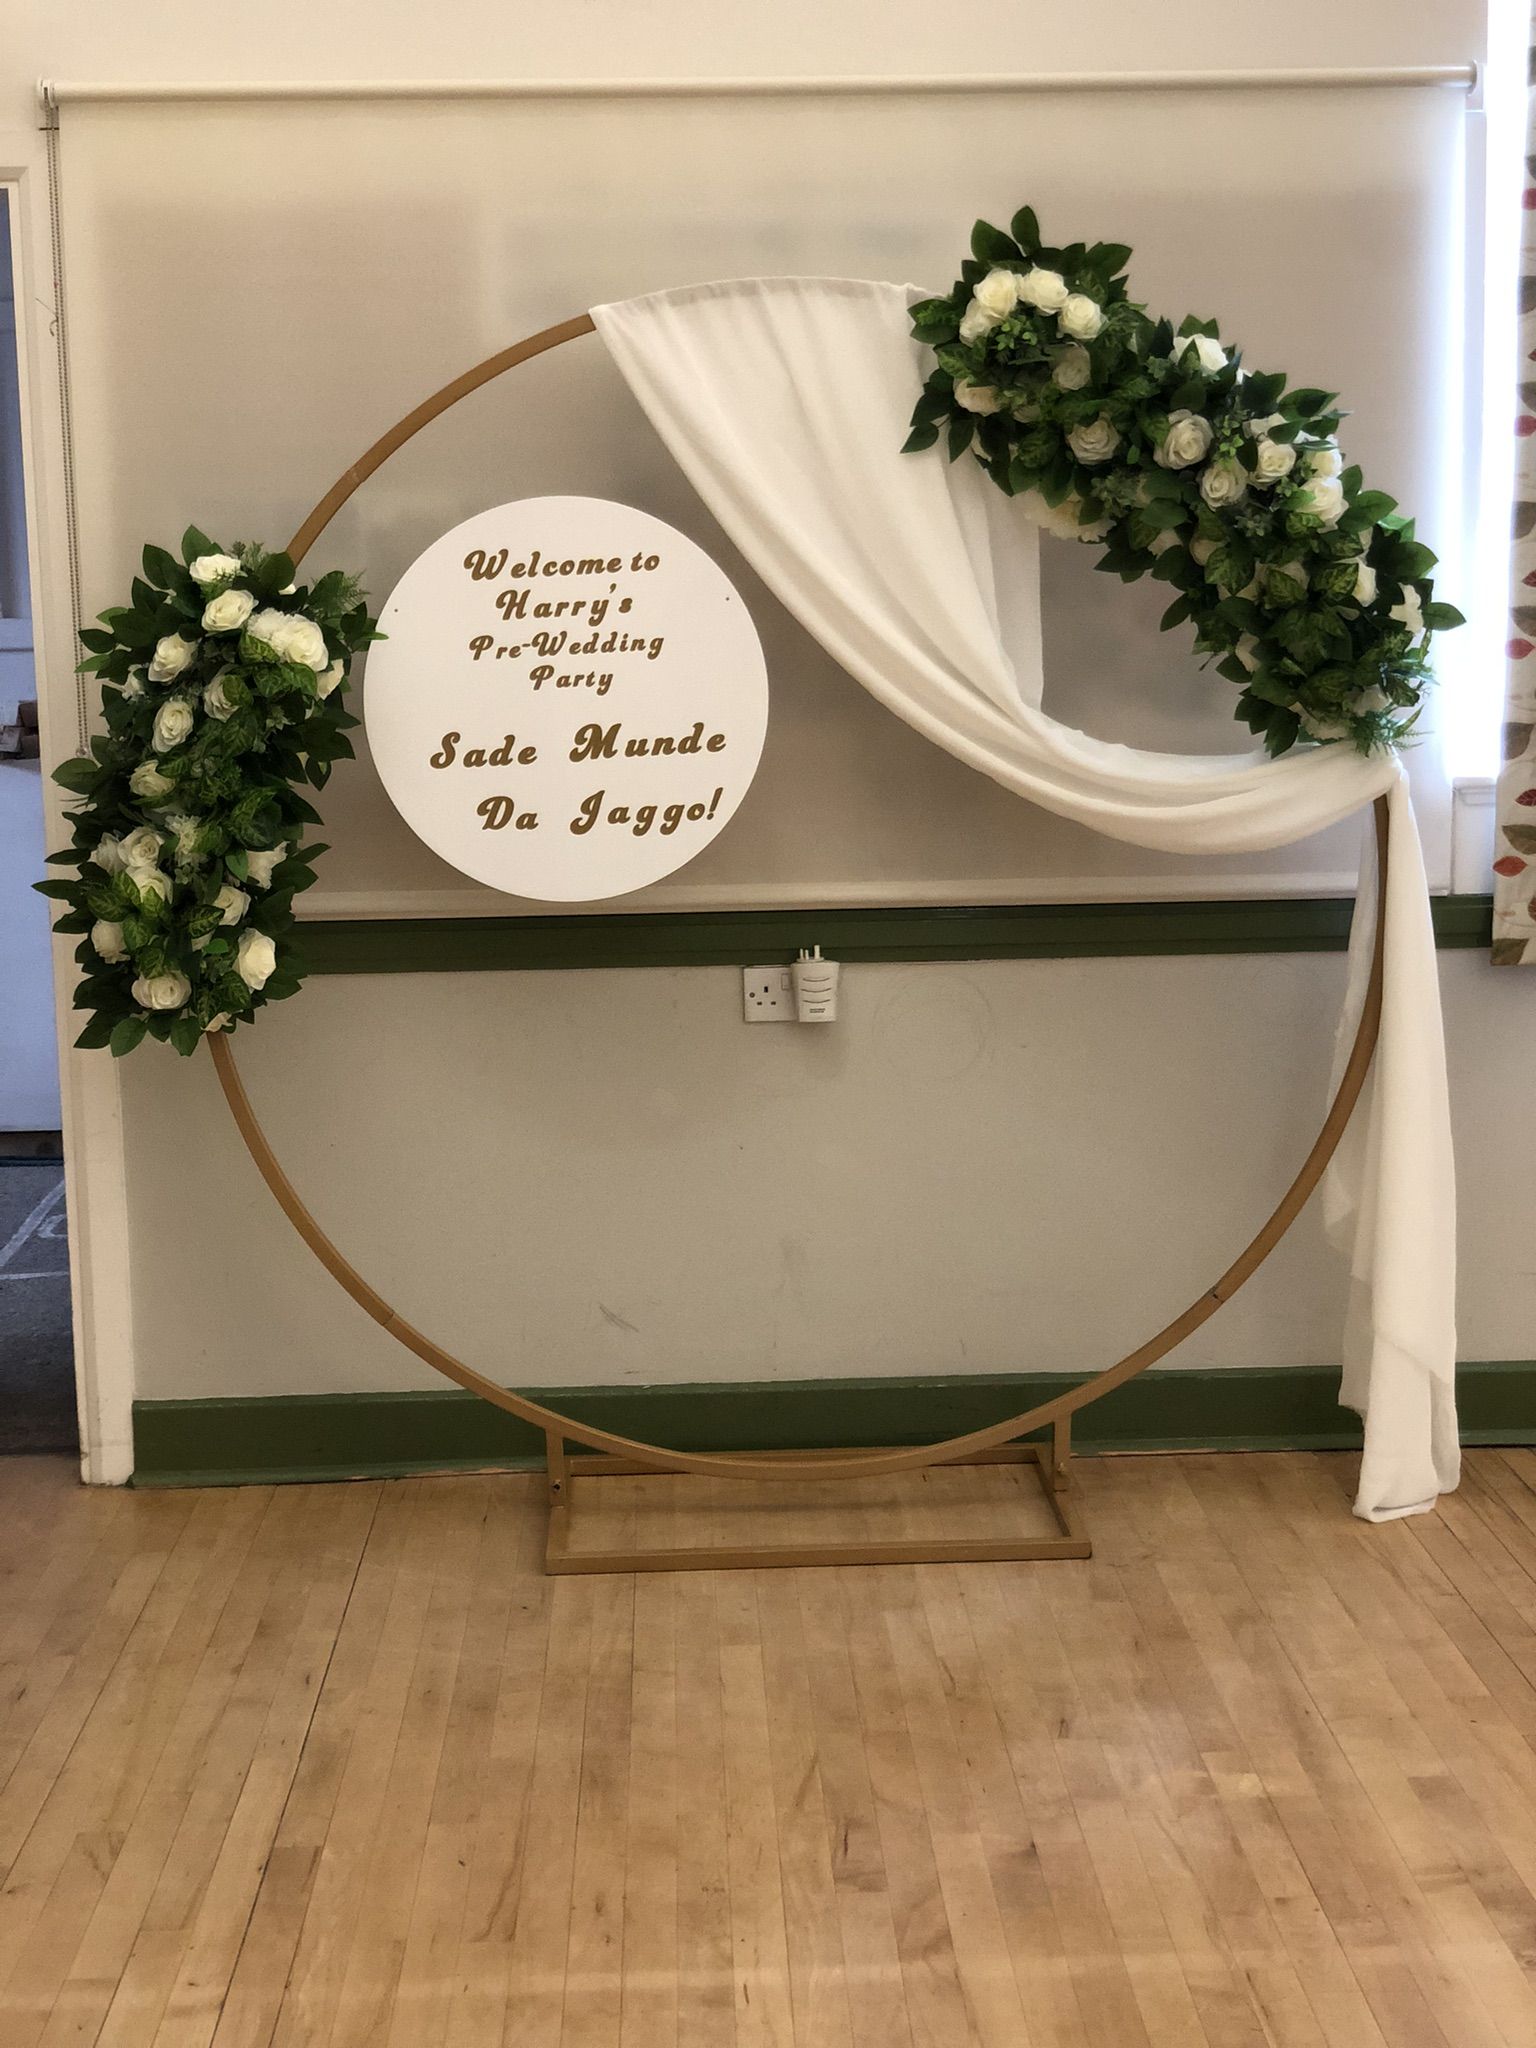 a circle with flowers and a sign that says welcome to the bride.